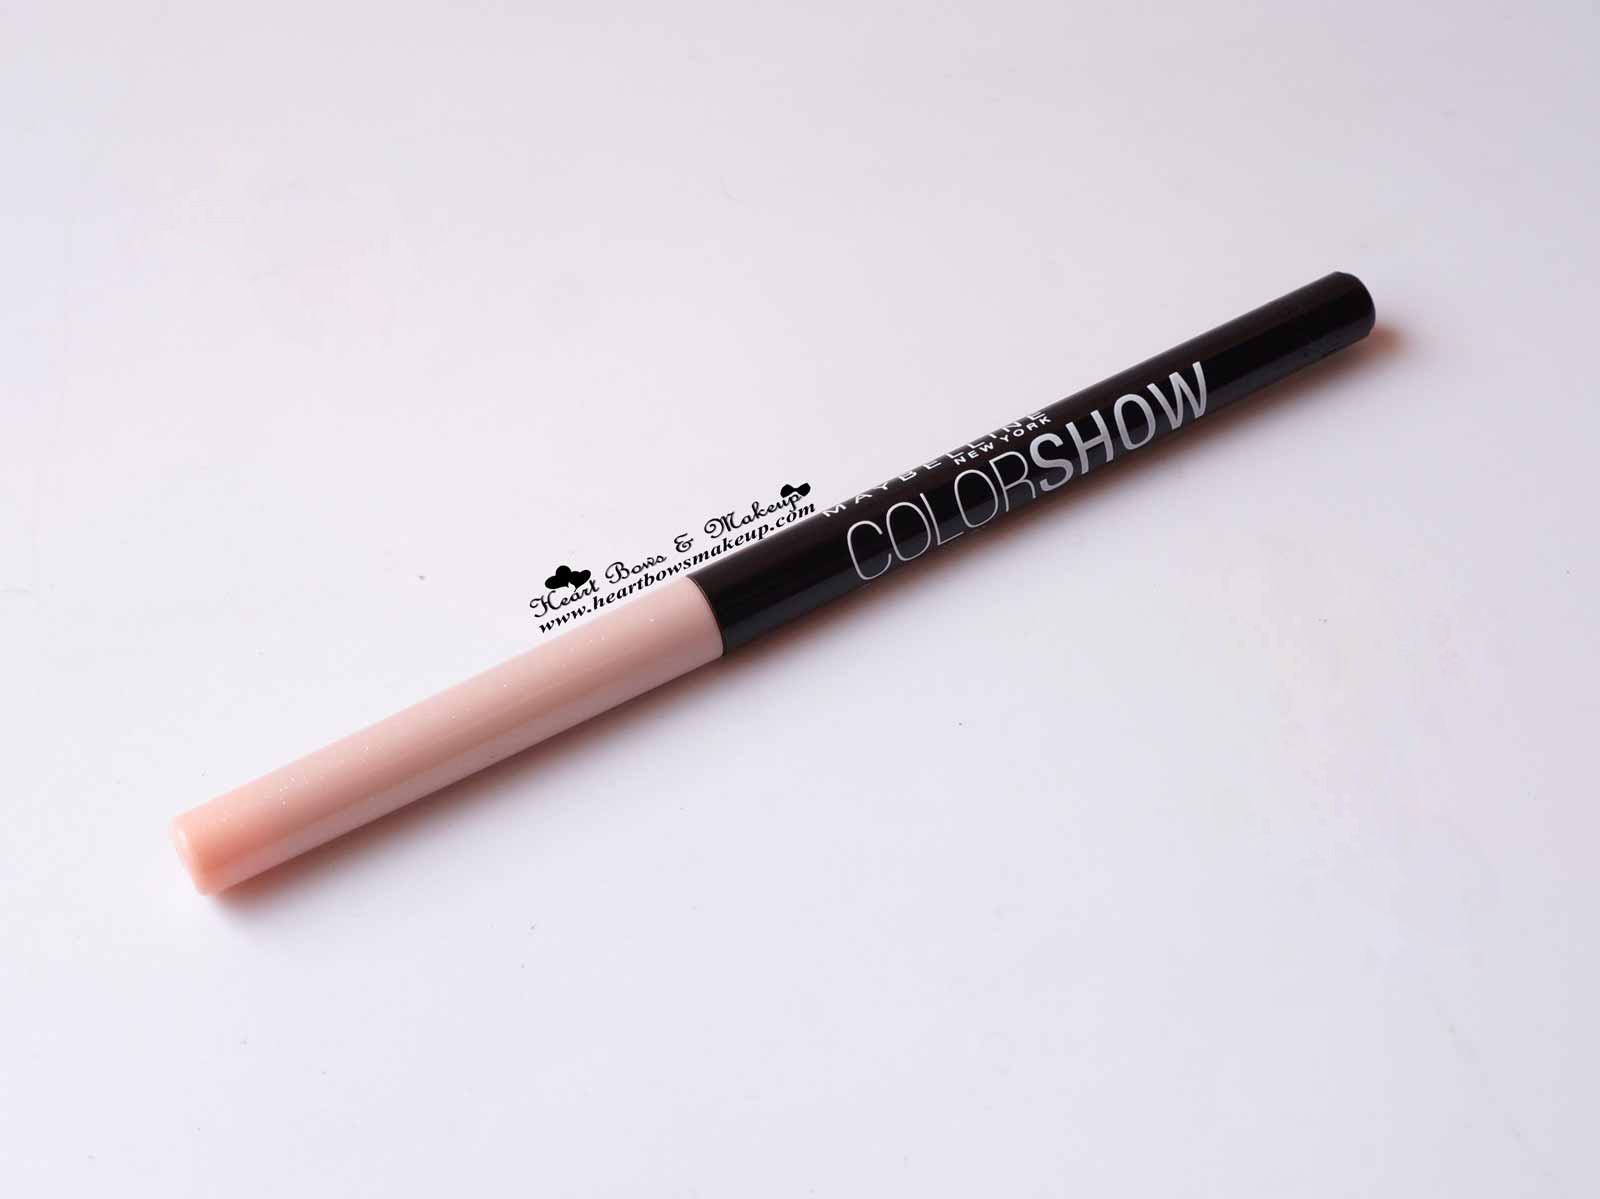 Maybelline Colorshow Crayon Khol Shiny Beige Review Swatches 